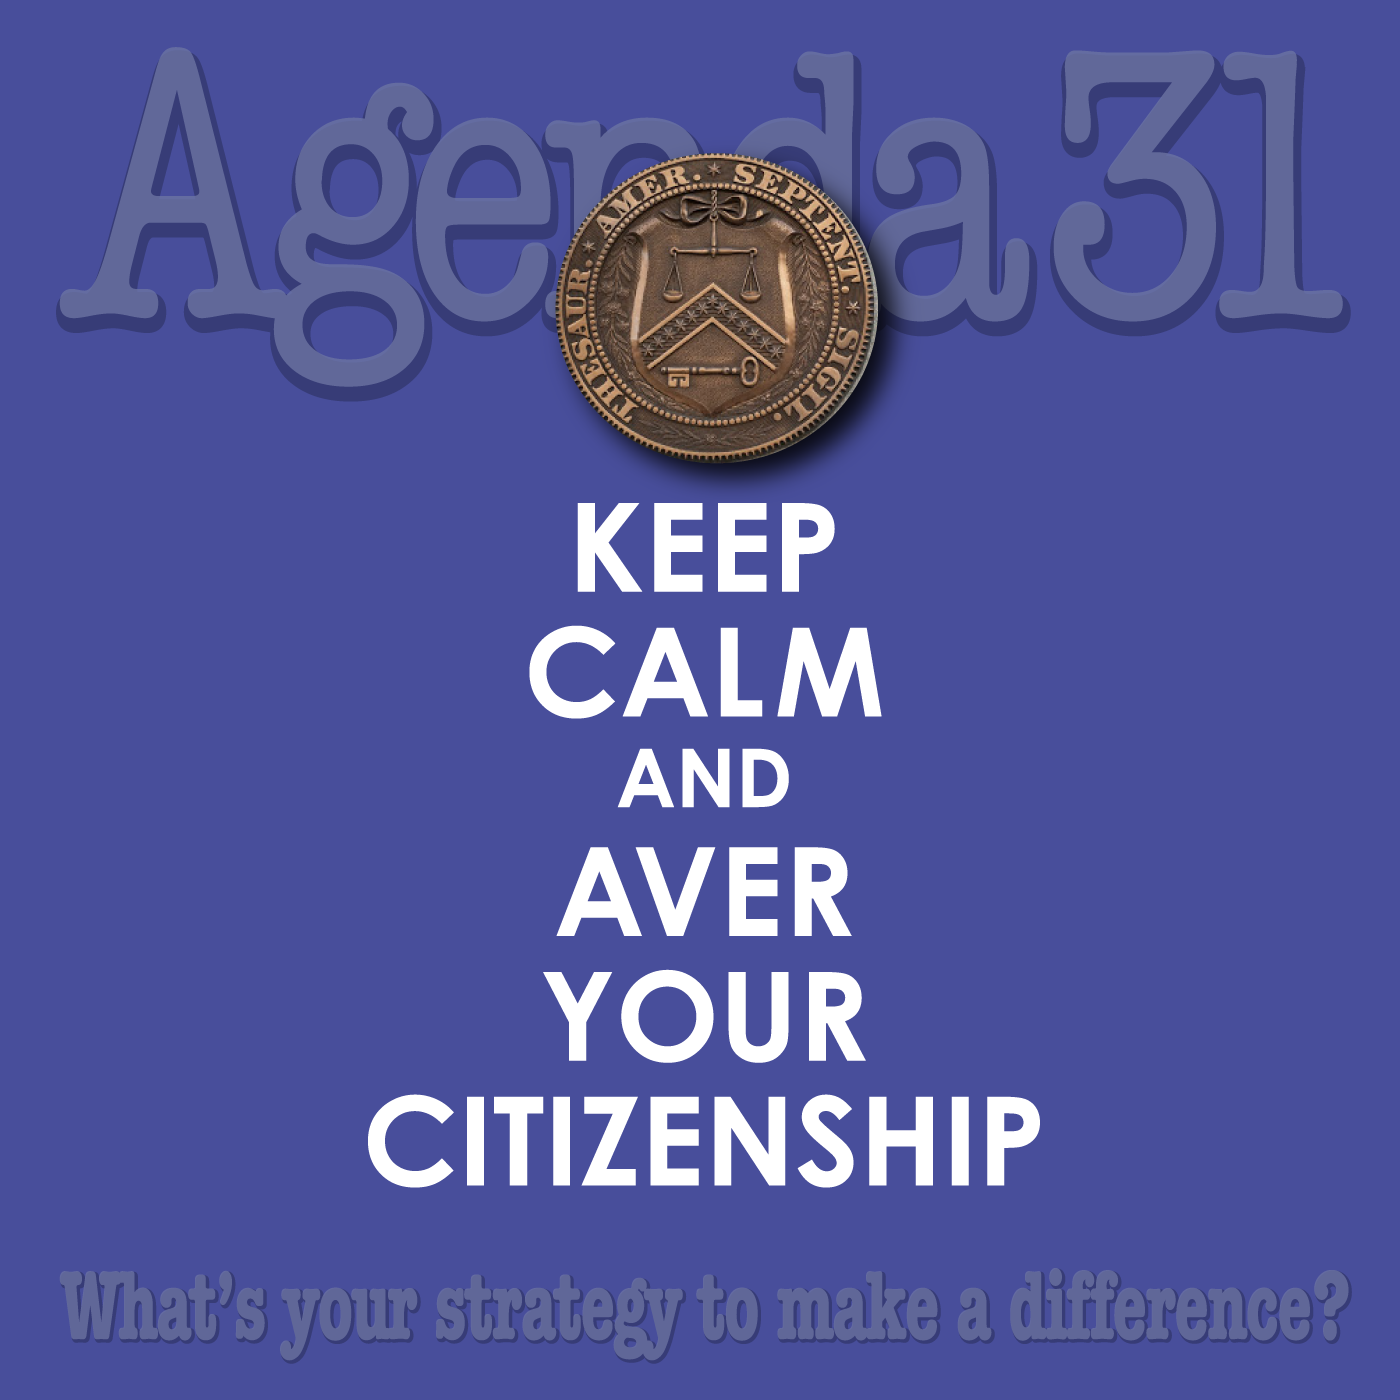 A31-077 – Keep Calm and Aver Your Citizenship